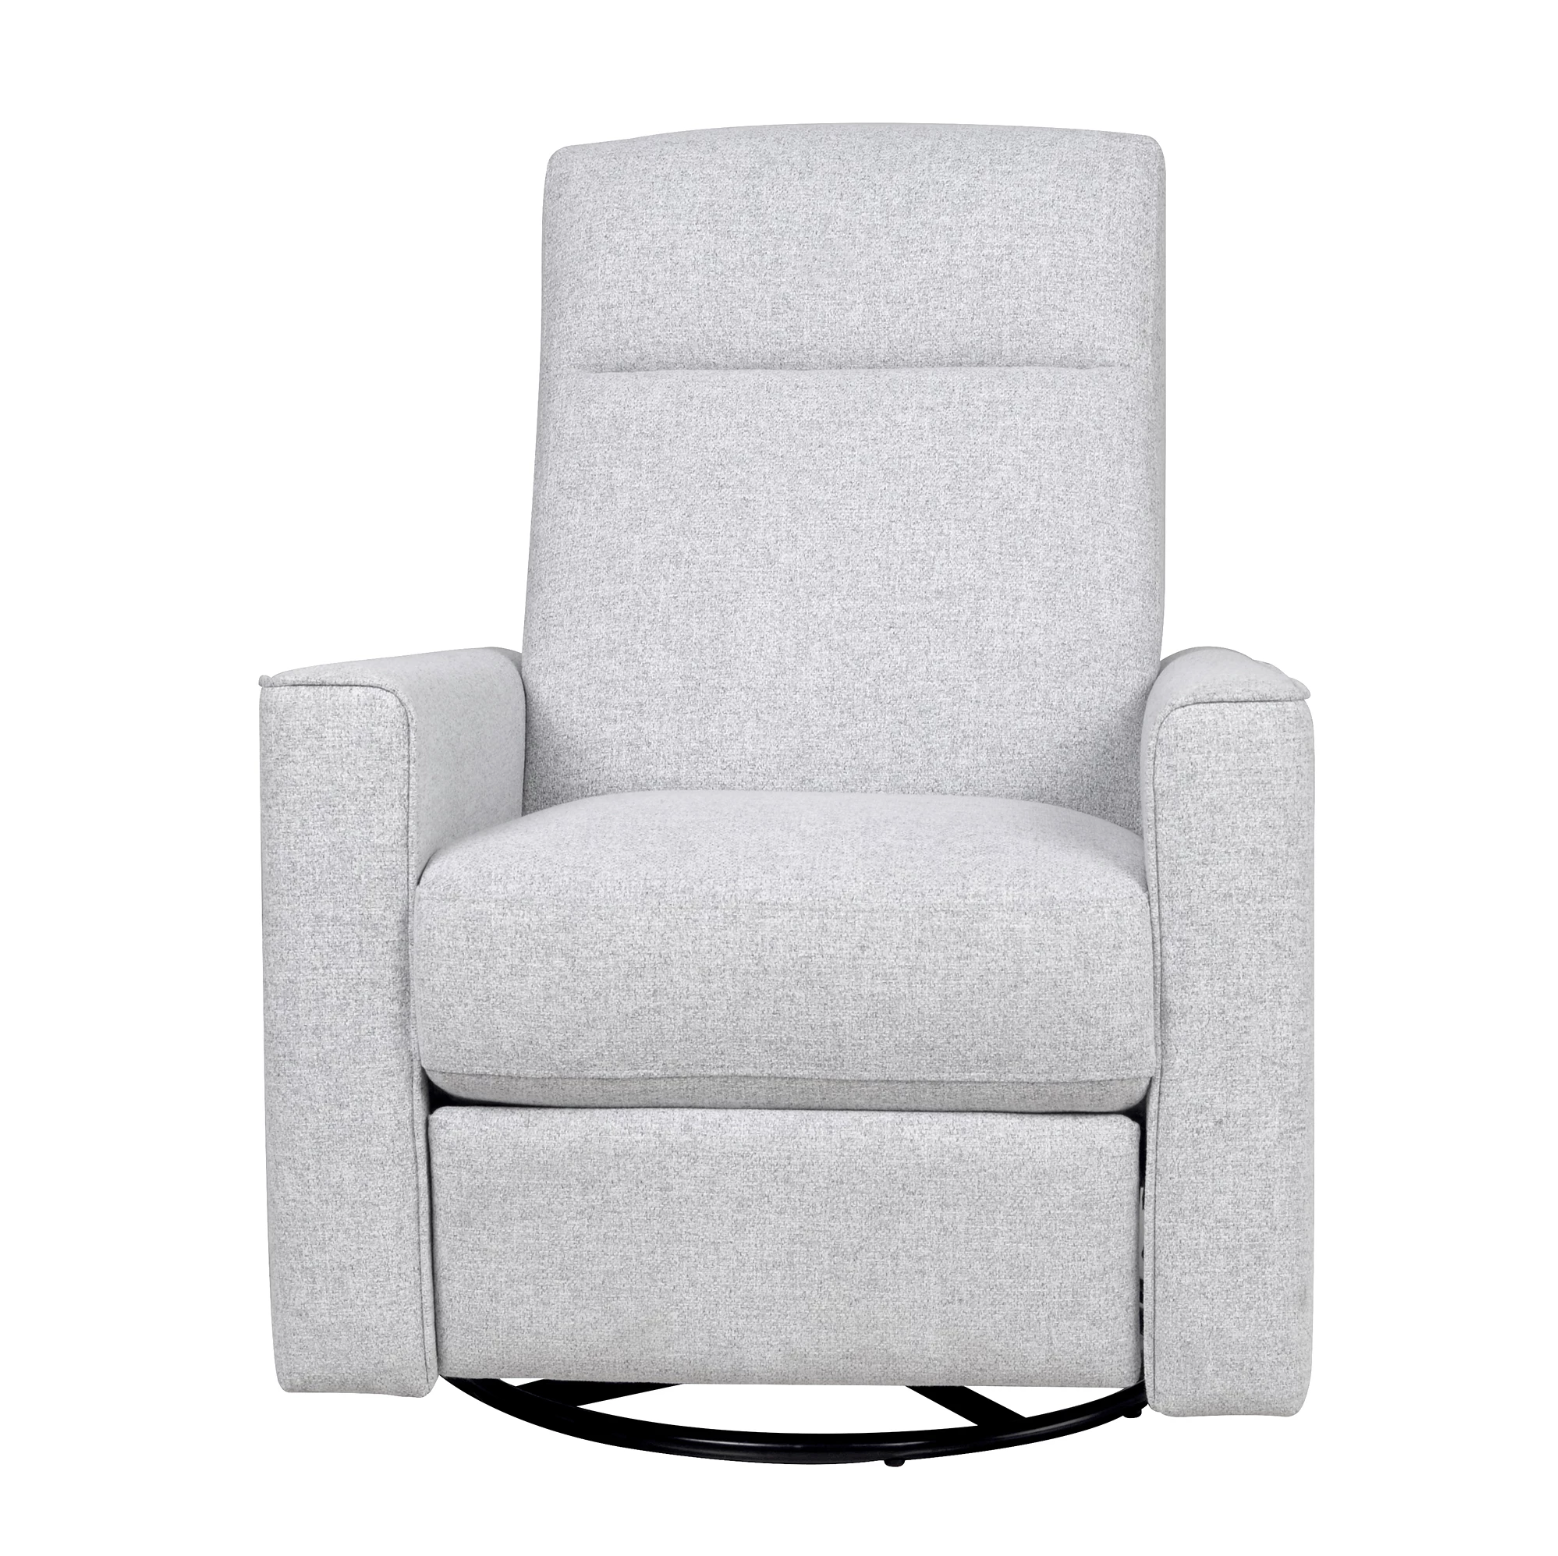 rowe upholstered manual reclining glider recliner